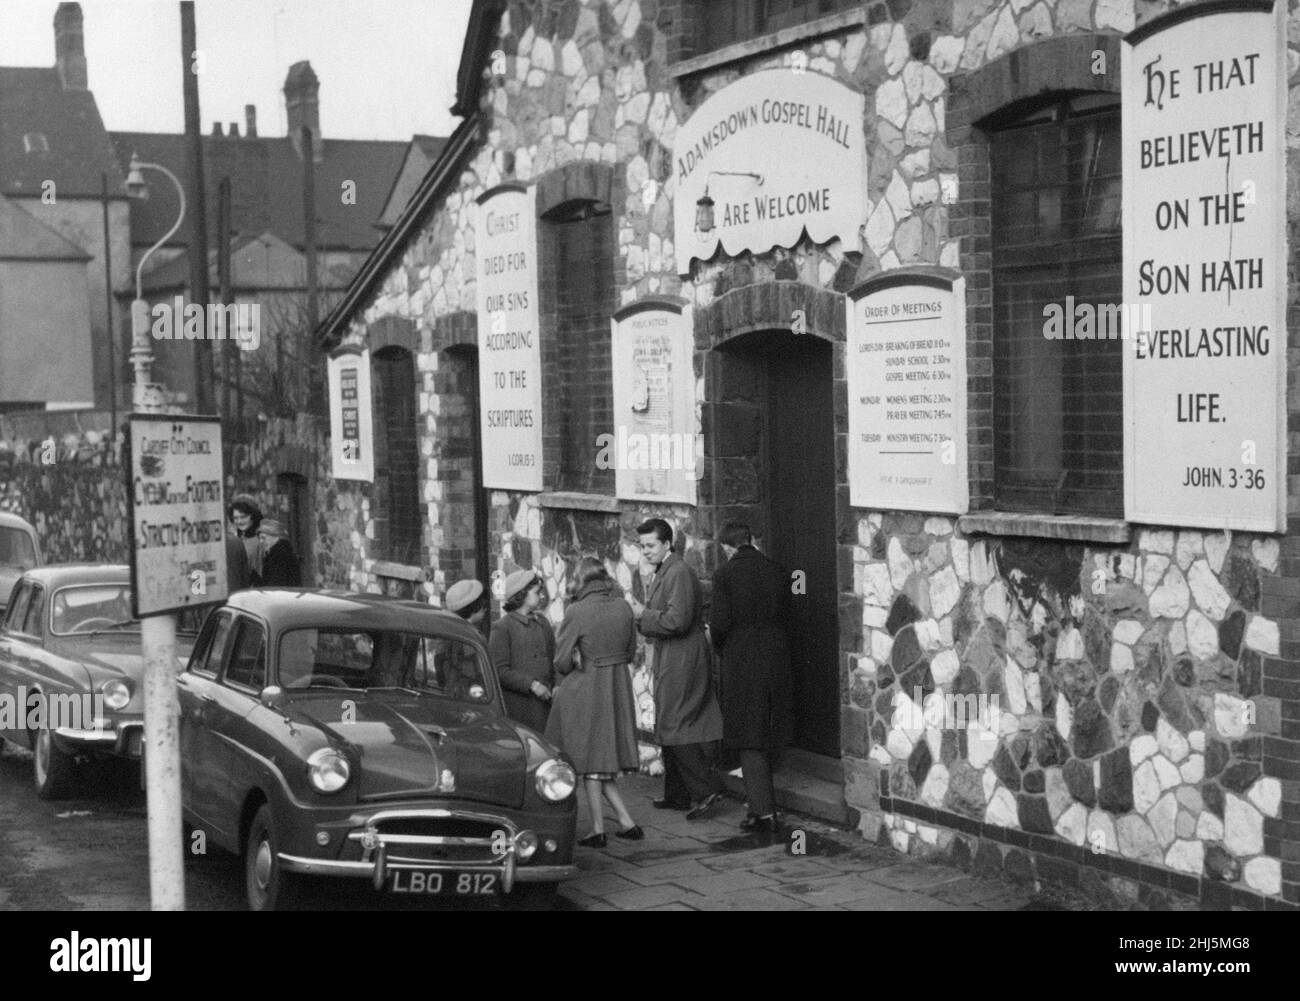 Adamsdown Gospel Hall, Kames Place, Adamsdown, an inner city area and community in the south of Cardiff, Wales. 23rd January 1961. Stock Photo